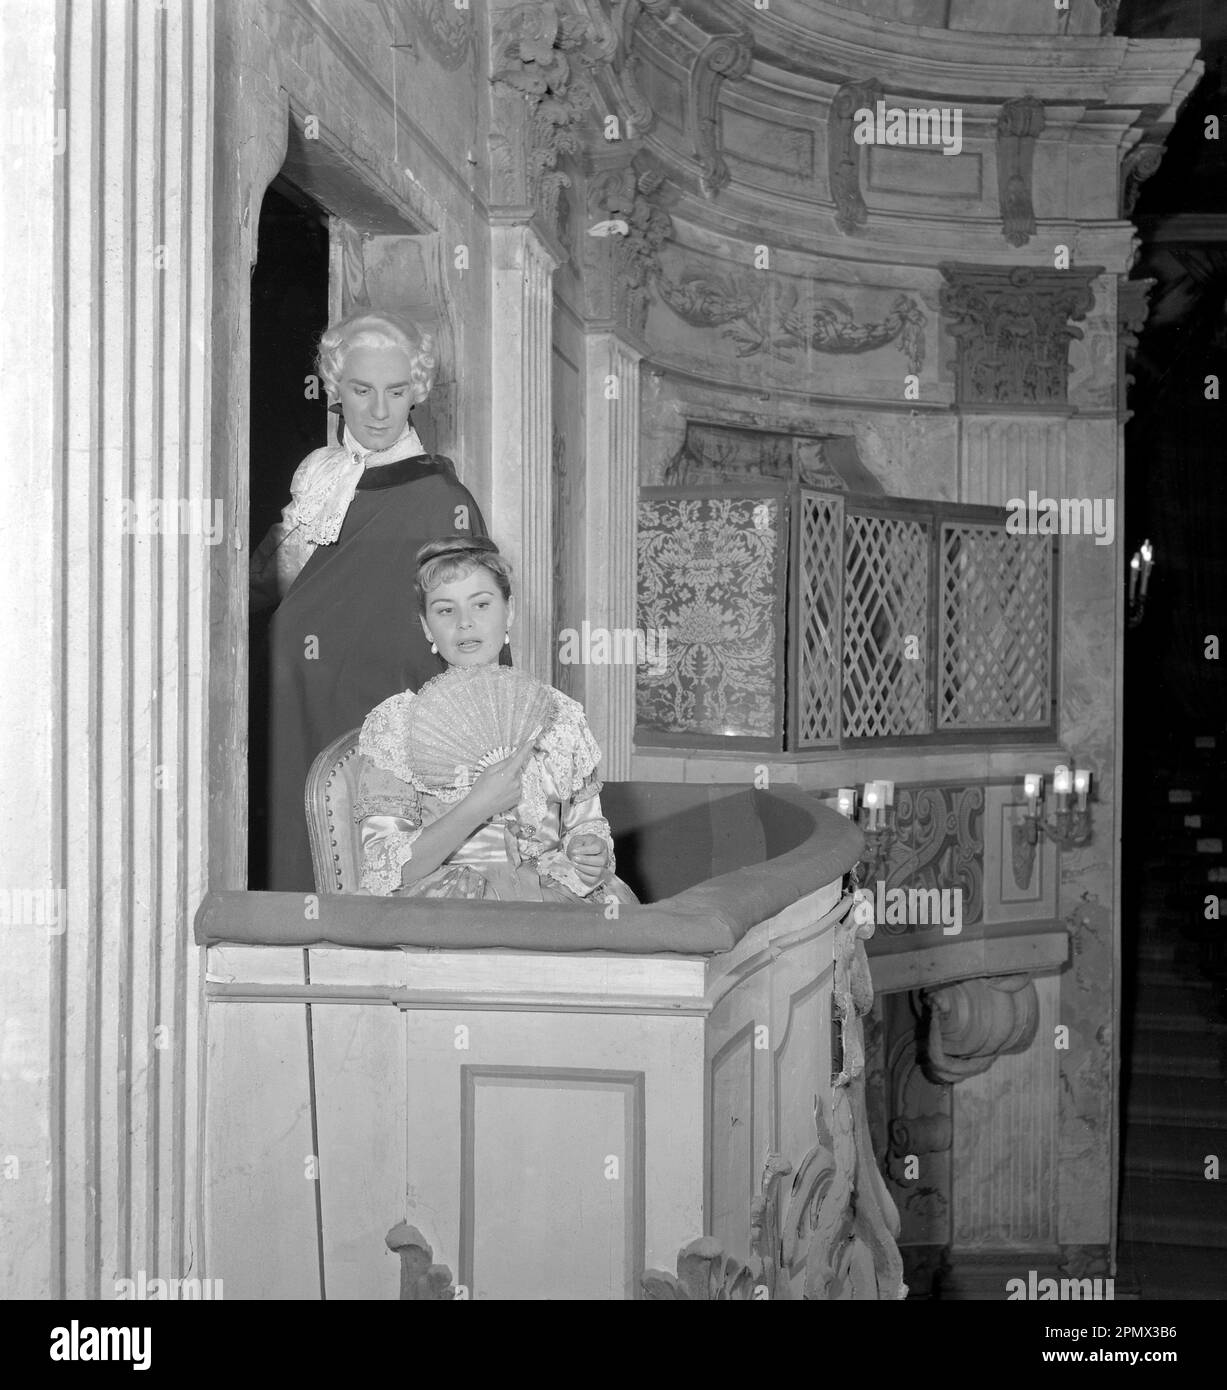 As if in the 18th century. Actors Jarl Kulle and Maj-Britt Nilsson in a scene taken inside the royal theatre of Drottningholm in Stockholm. The photograph was originally published to illustrate a historic novel running in several episodes in a magazine 1956. The room, furniture and clothing are typical of the 18th century Sweden. Conard ref EC3168 Stock Photo